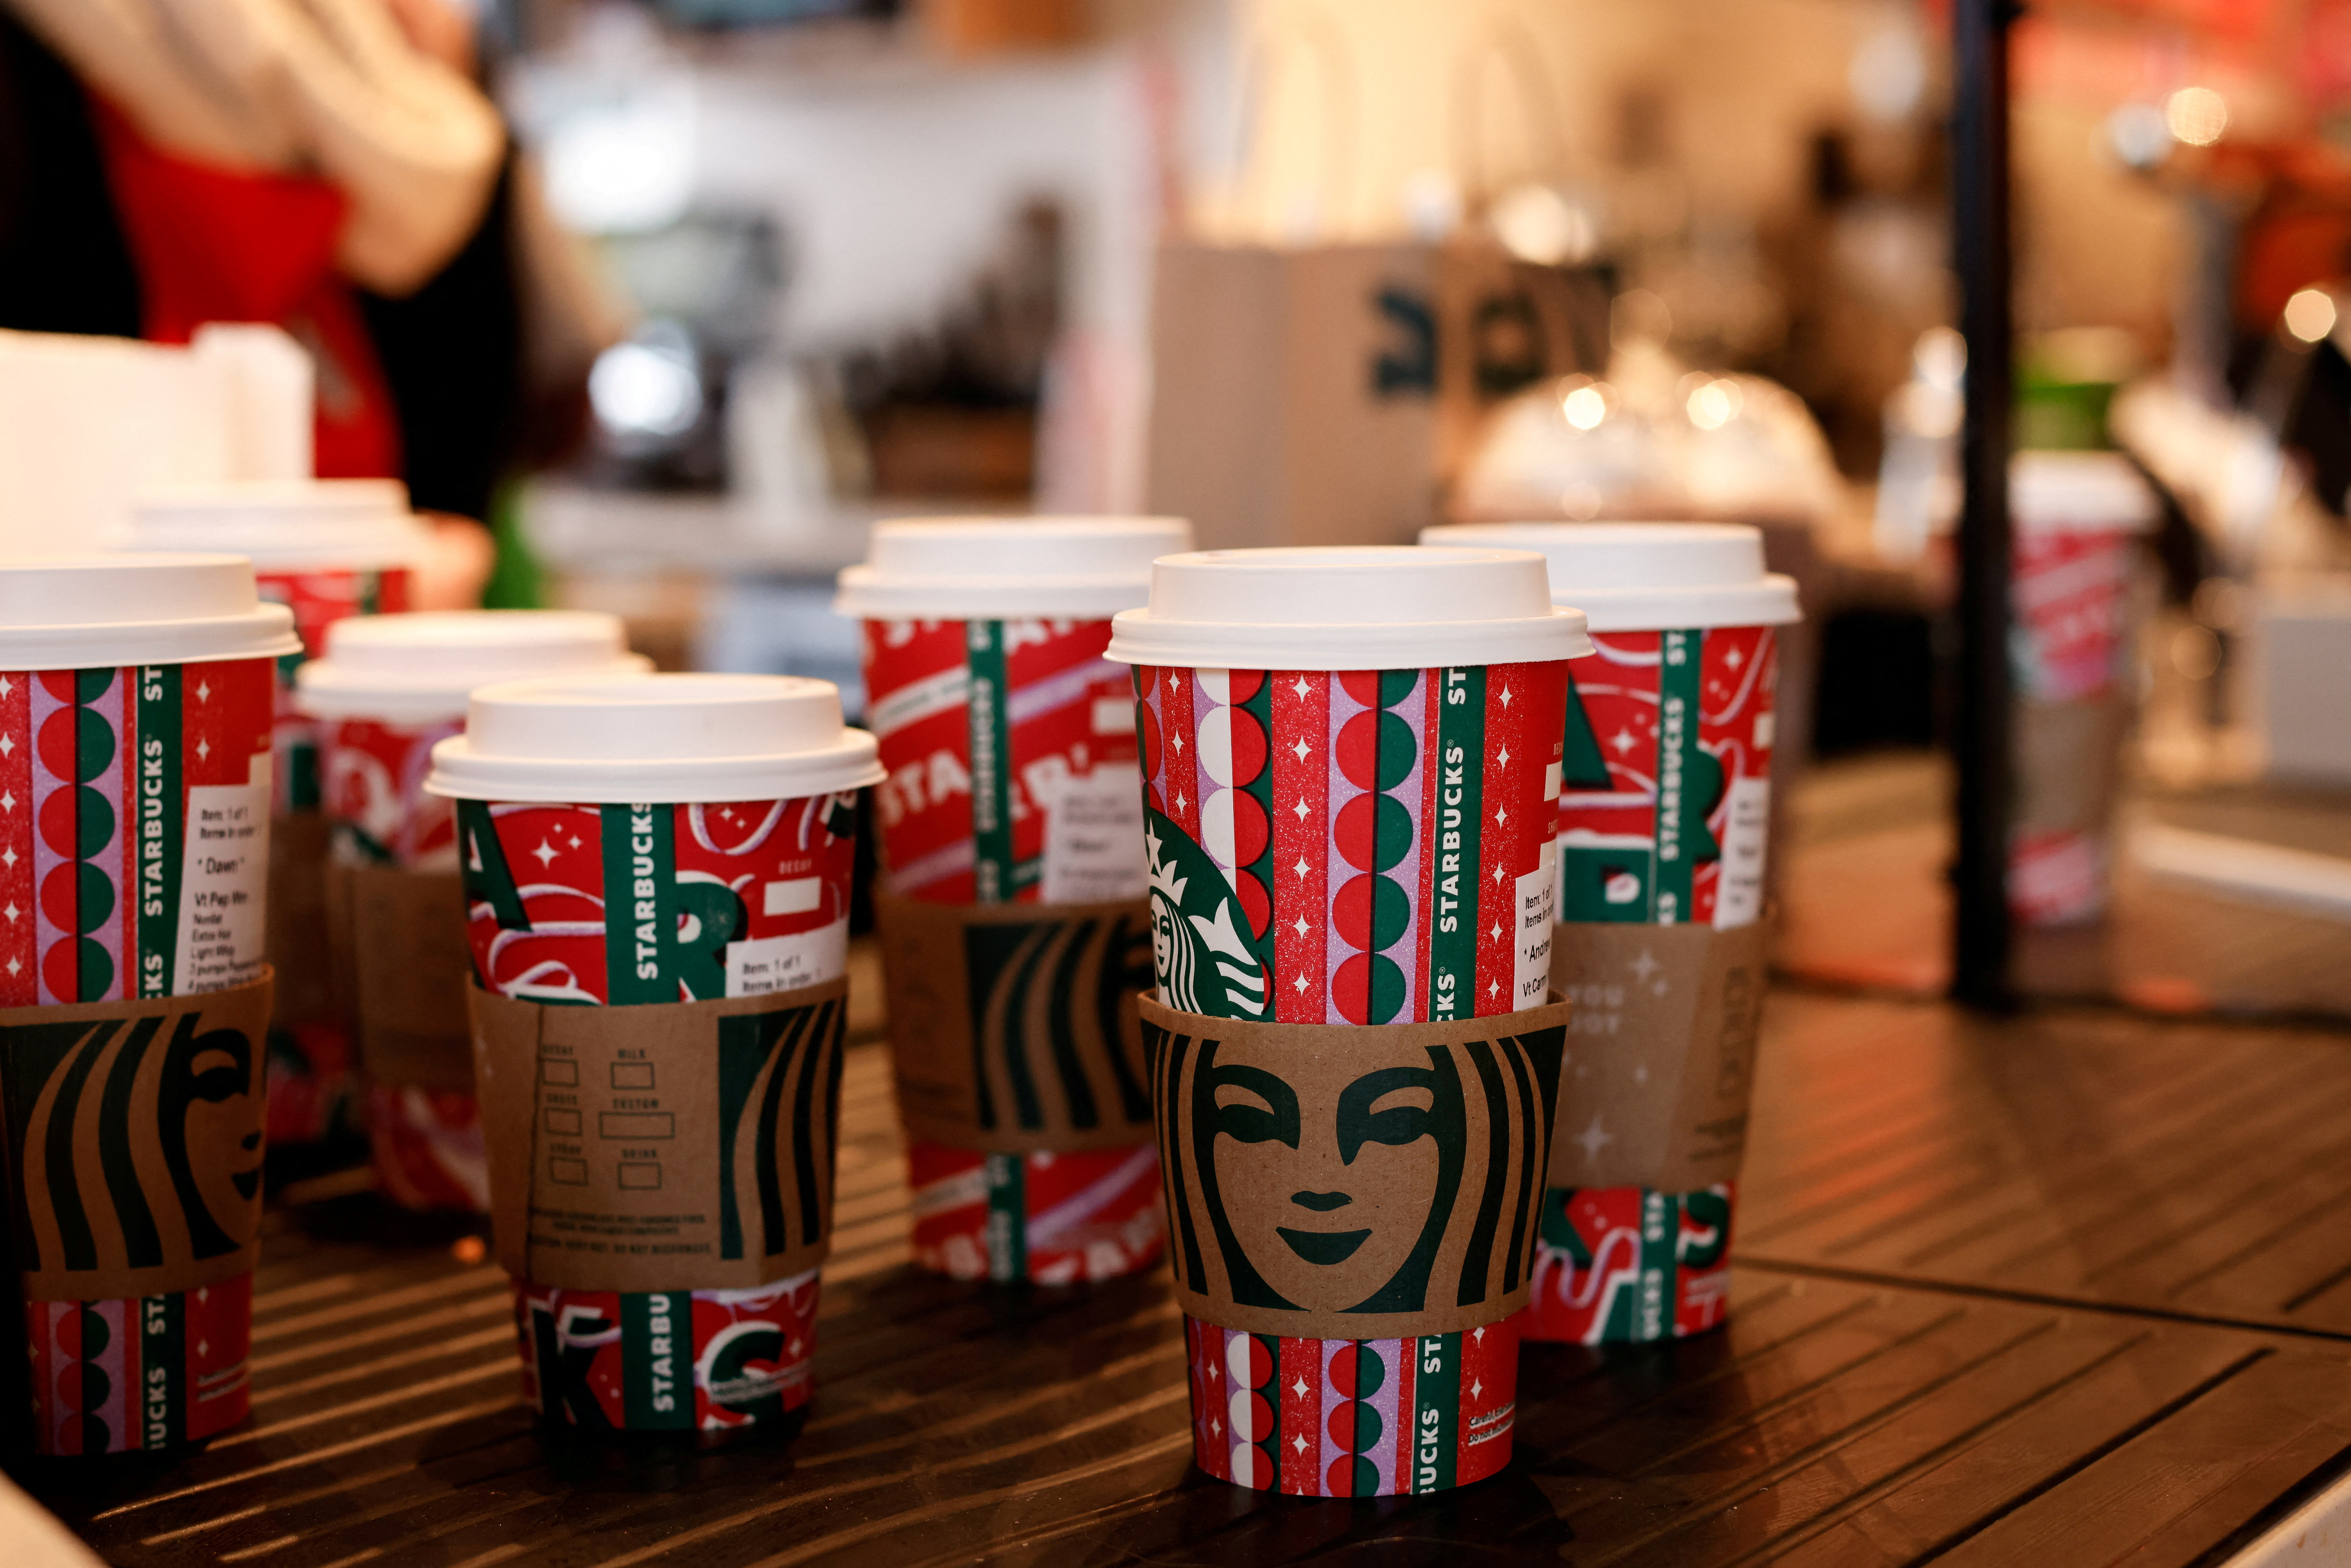 Starbucks is bringing back its red holiday cups — but there's a twist